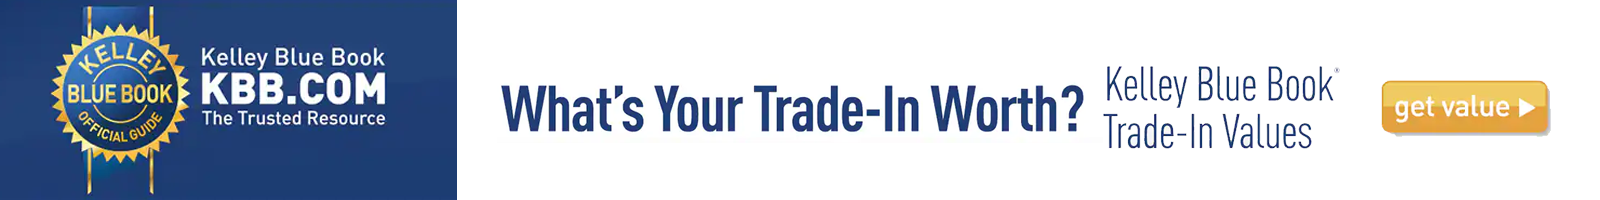 KBB Value Your Trade